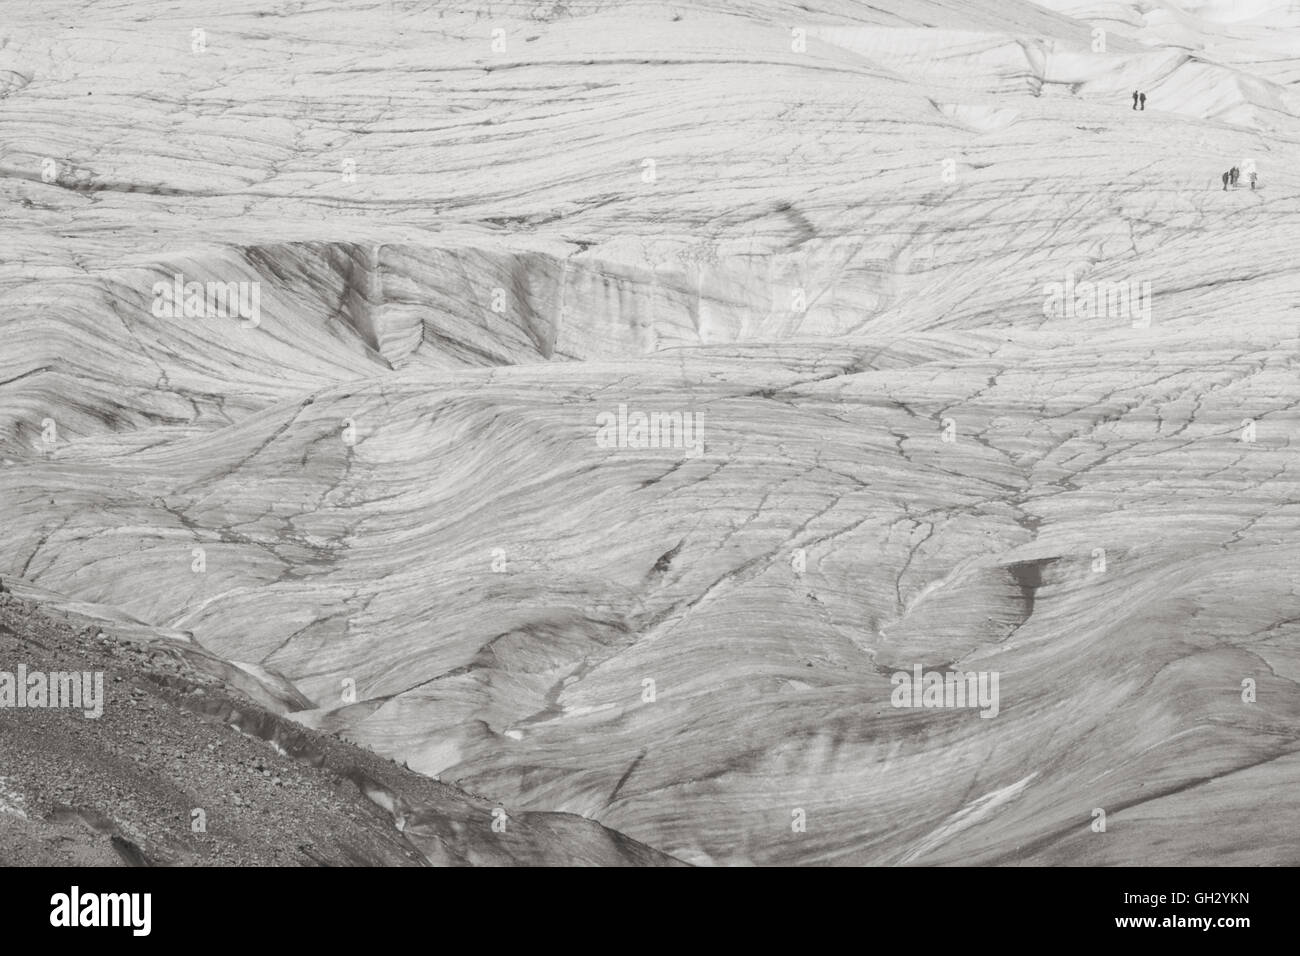 Two groups of people walk across the vastness of the leading edge of the Root Glacier in Eastern Alaska. Stock Photo